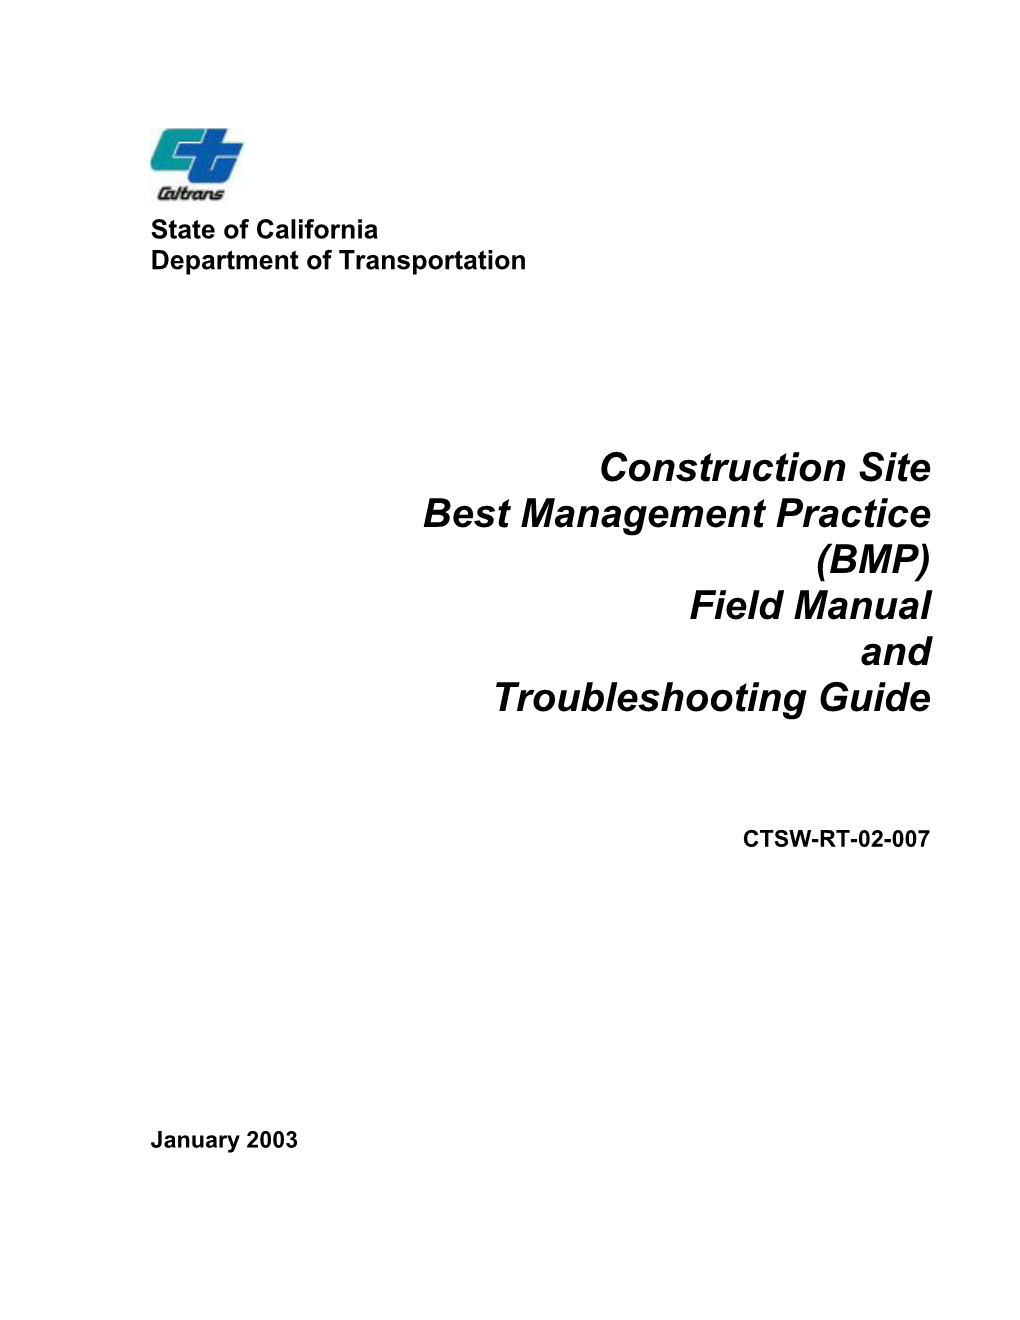 Construction Site Best Management Practice (BMP) Field Manual and Troubleshooting Guide